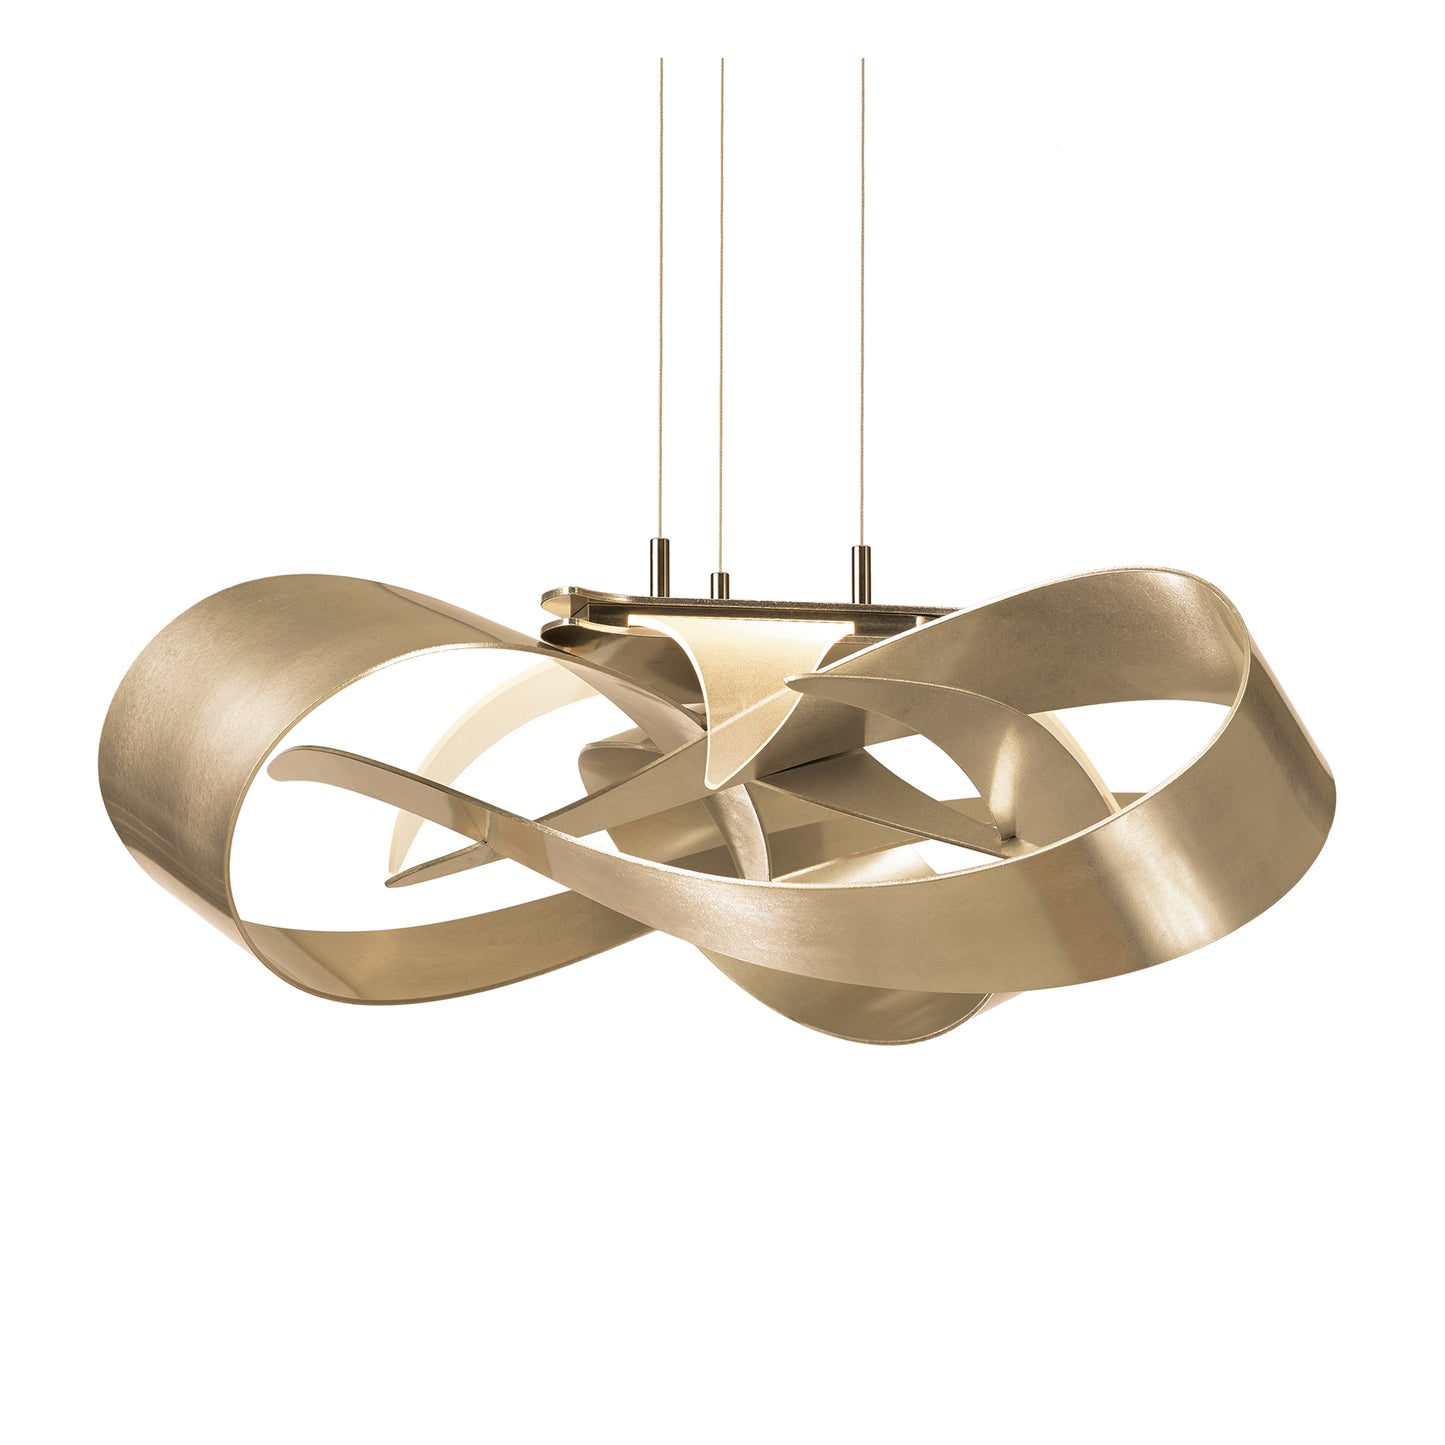 The Flux Pendant by Hubbardton Forge is an elegantly designed LED lighting fixture. This Flux Pendant light features a circular shape, adding a touch of sophistication to any space it illuminates.